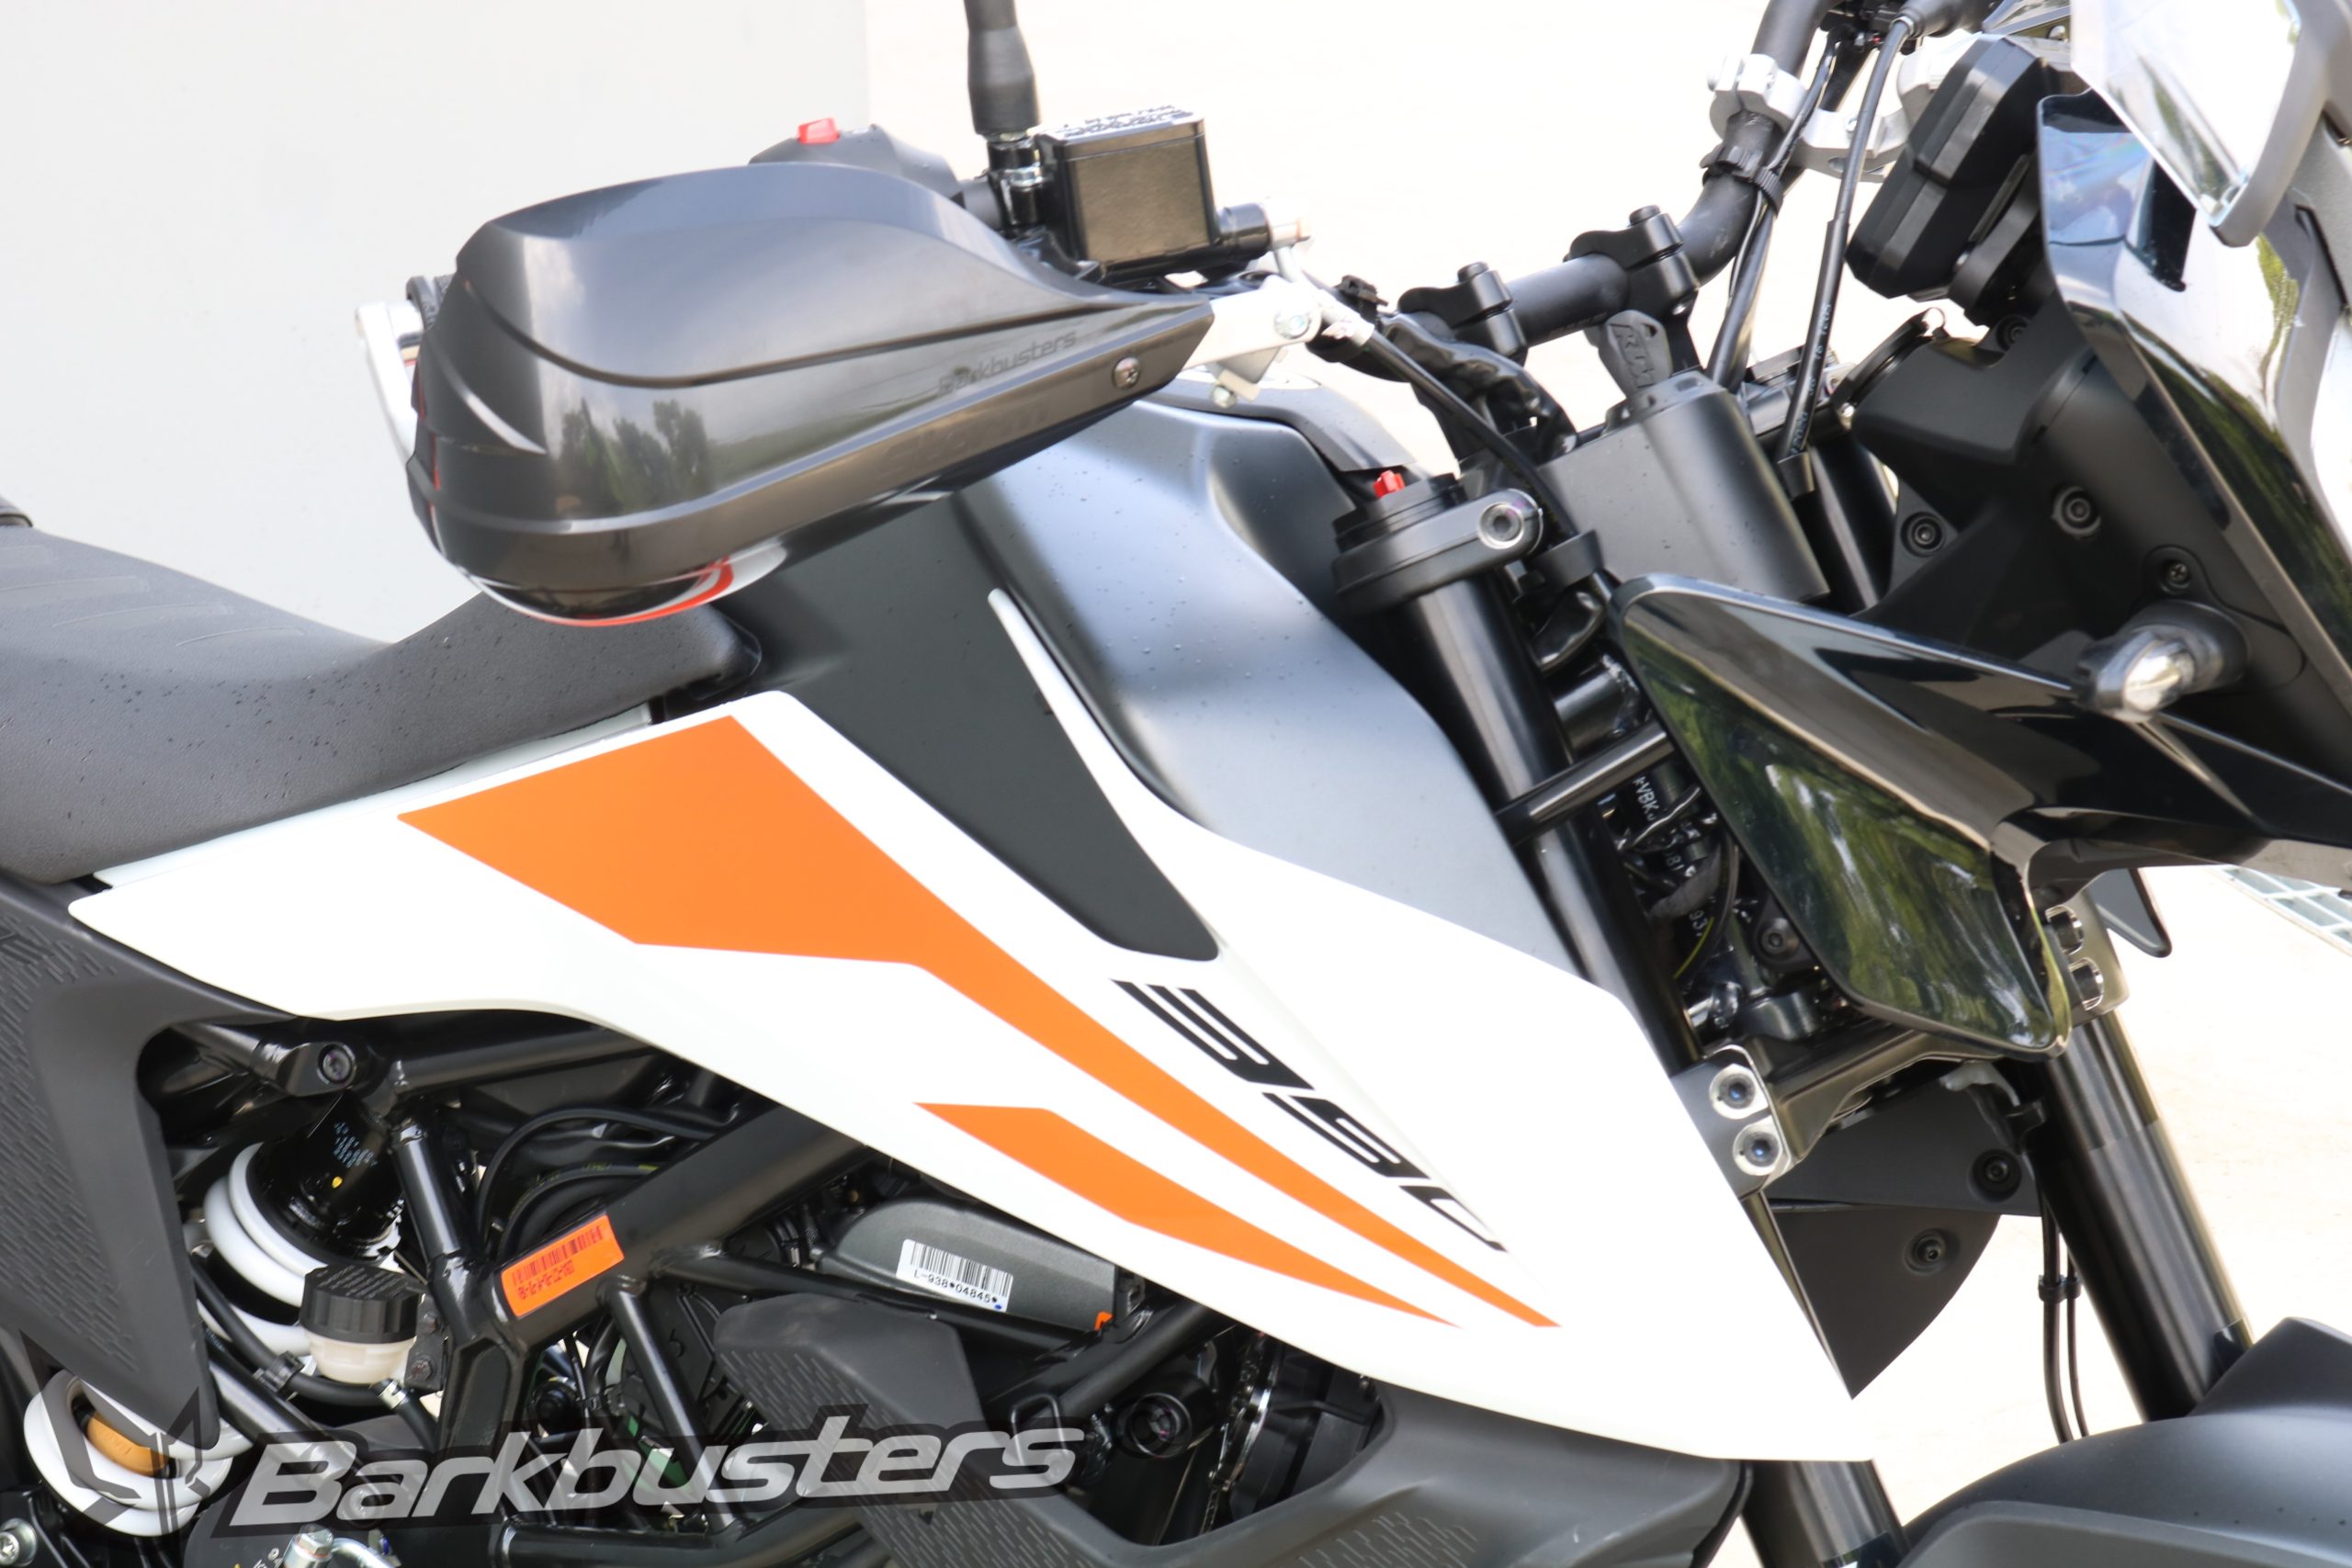 BARKBUSTERS Handguard Hardware Kit (Code: BHG-084) fitted to KTM 390 Adventure with STORM guards (Code: STM-003) sold separately